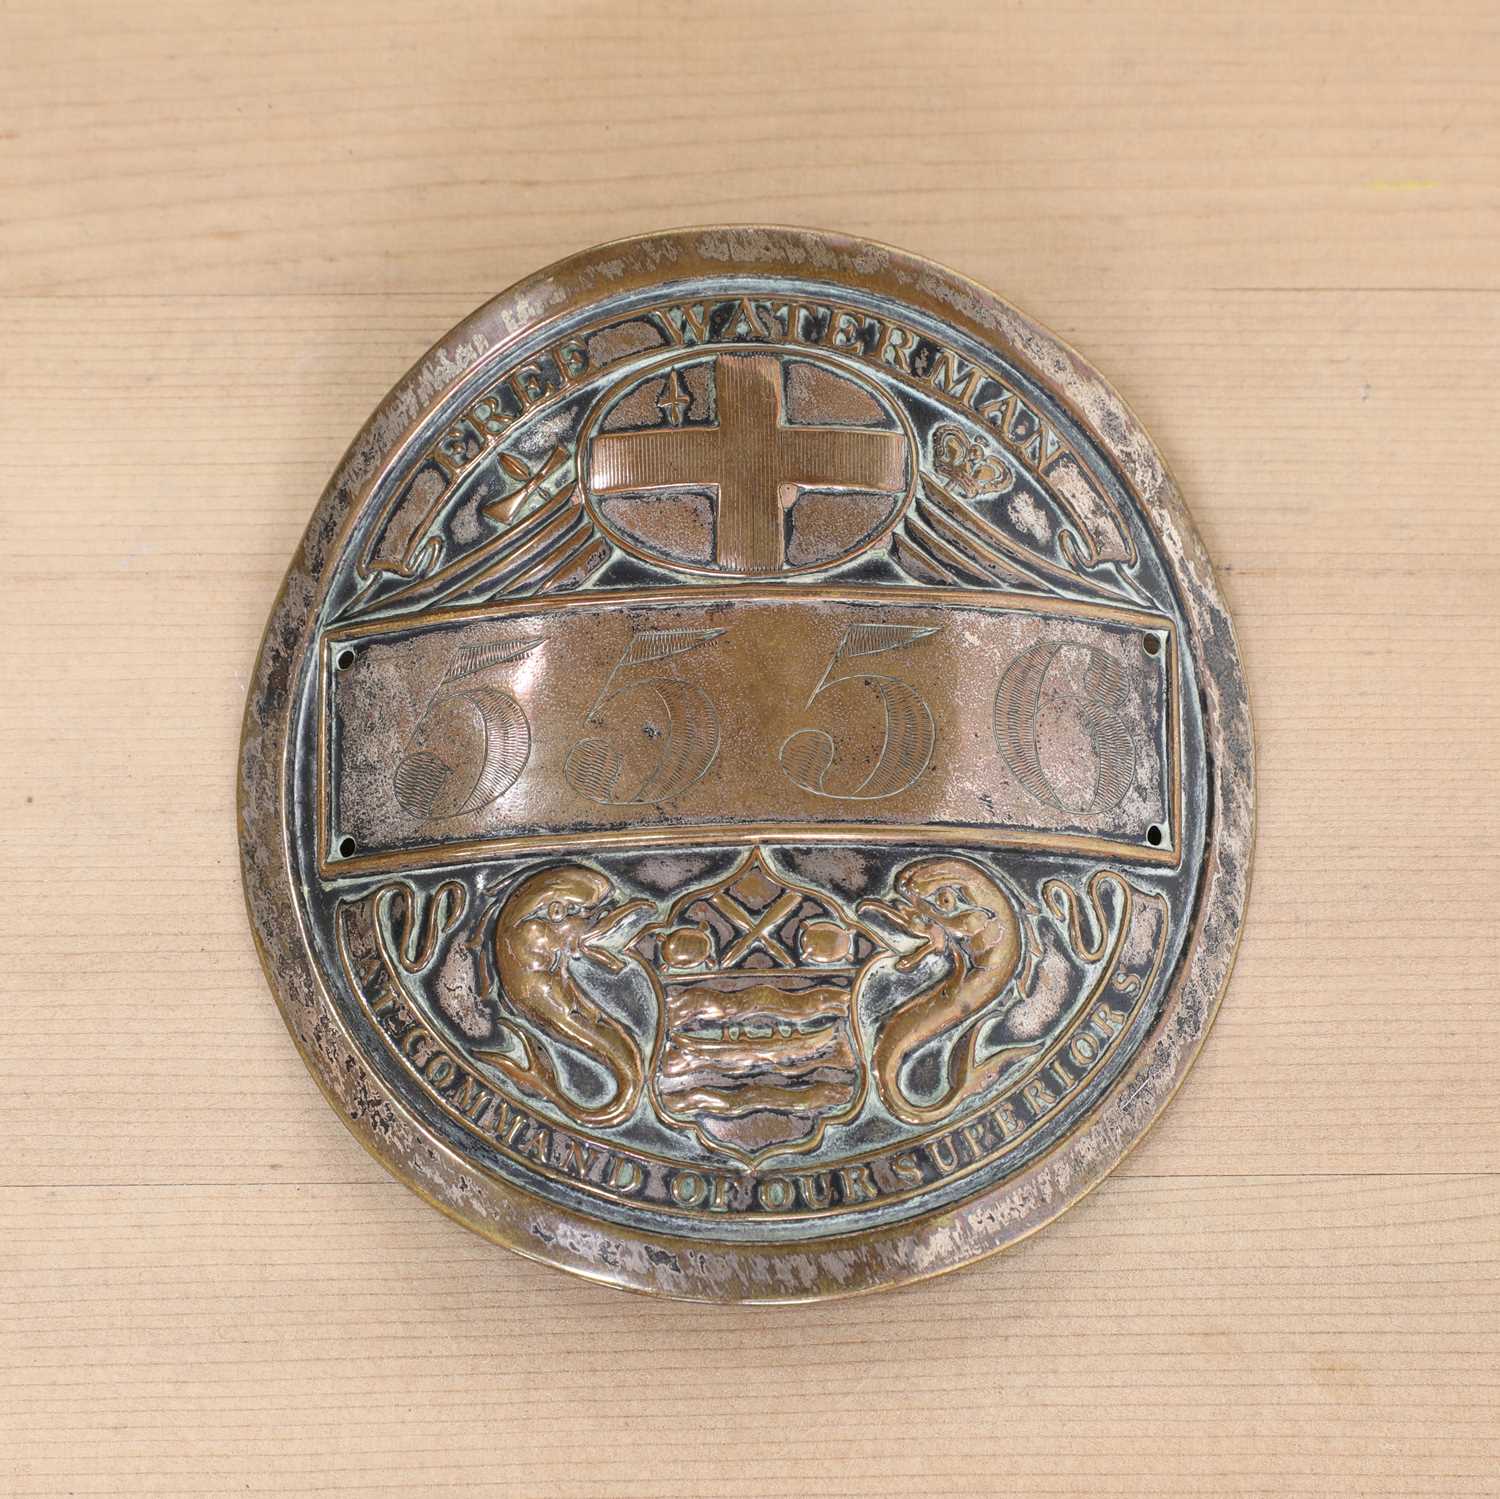 Lot 363 - A silver-plated copper Free Waterman badge